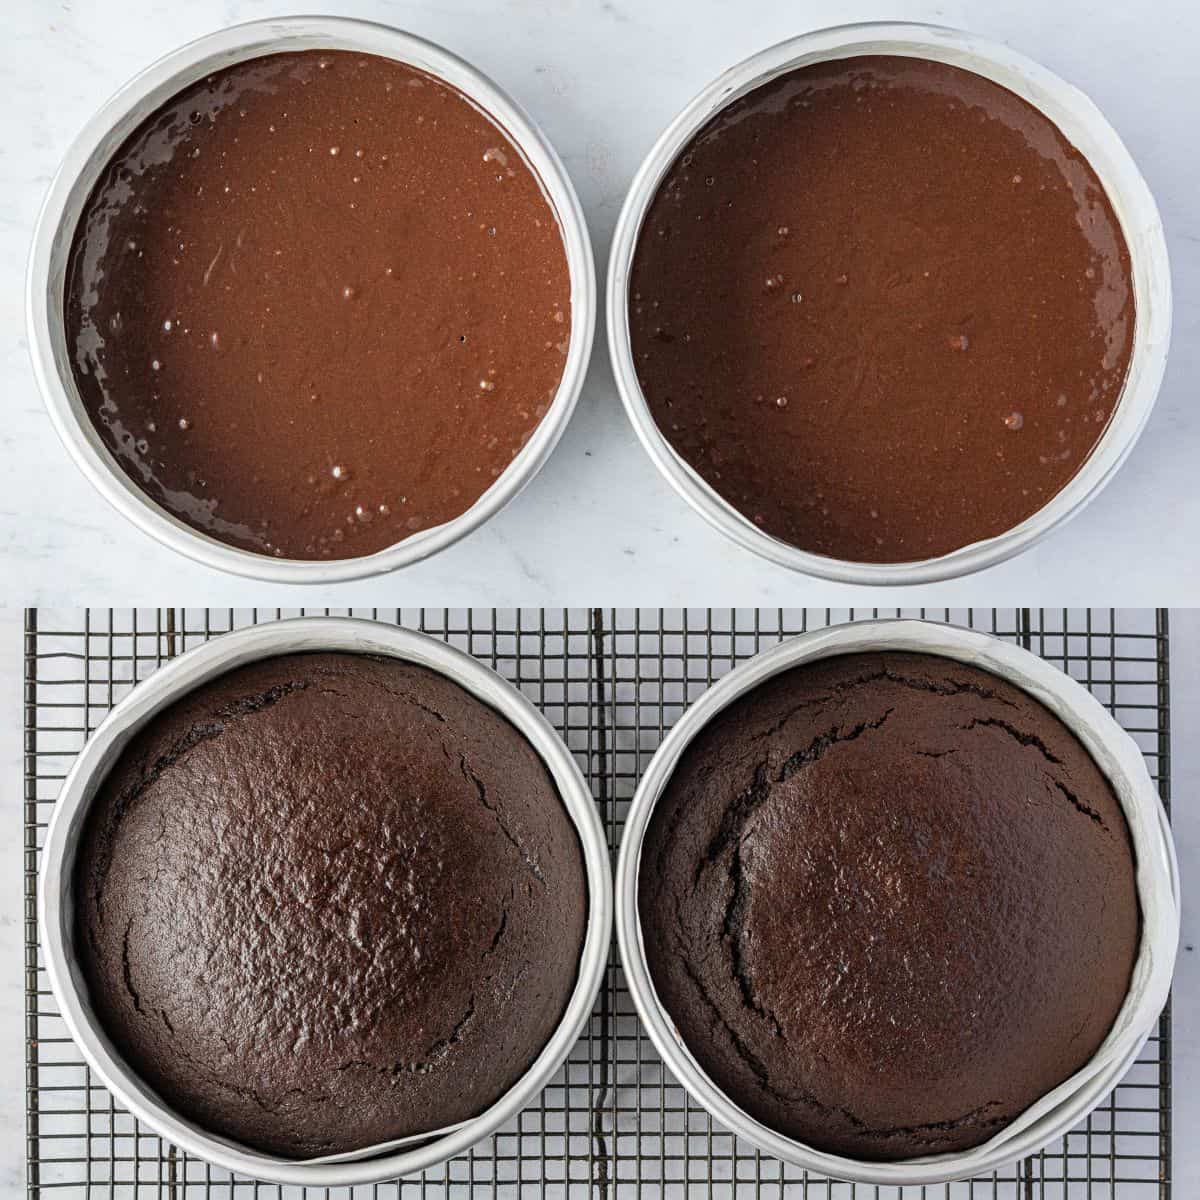 Step 3, a two image collage of the cakes before and after baking.